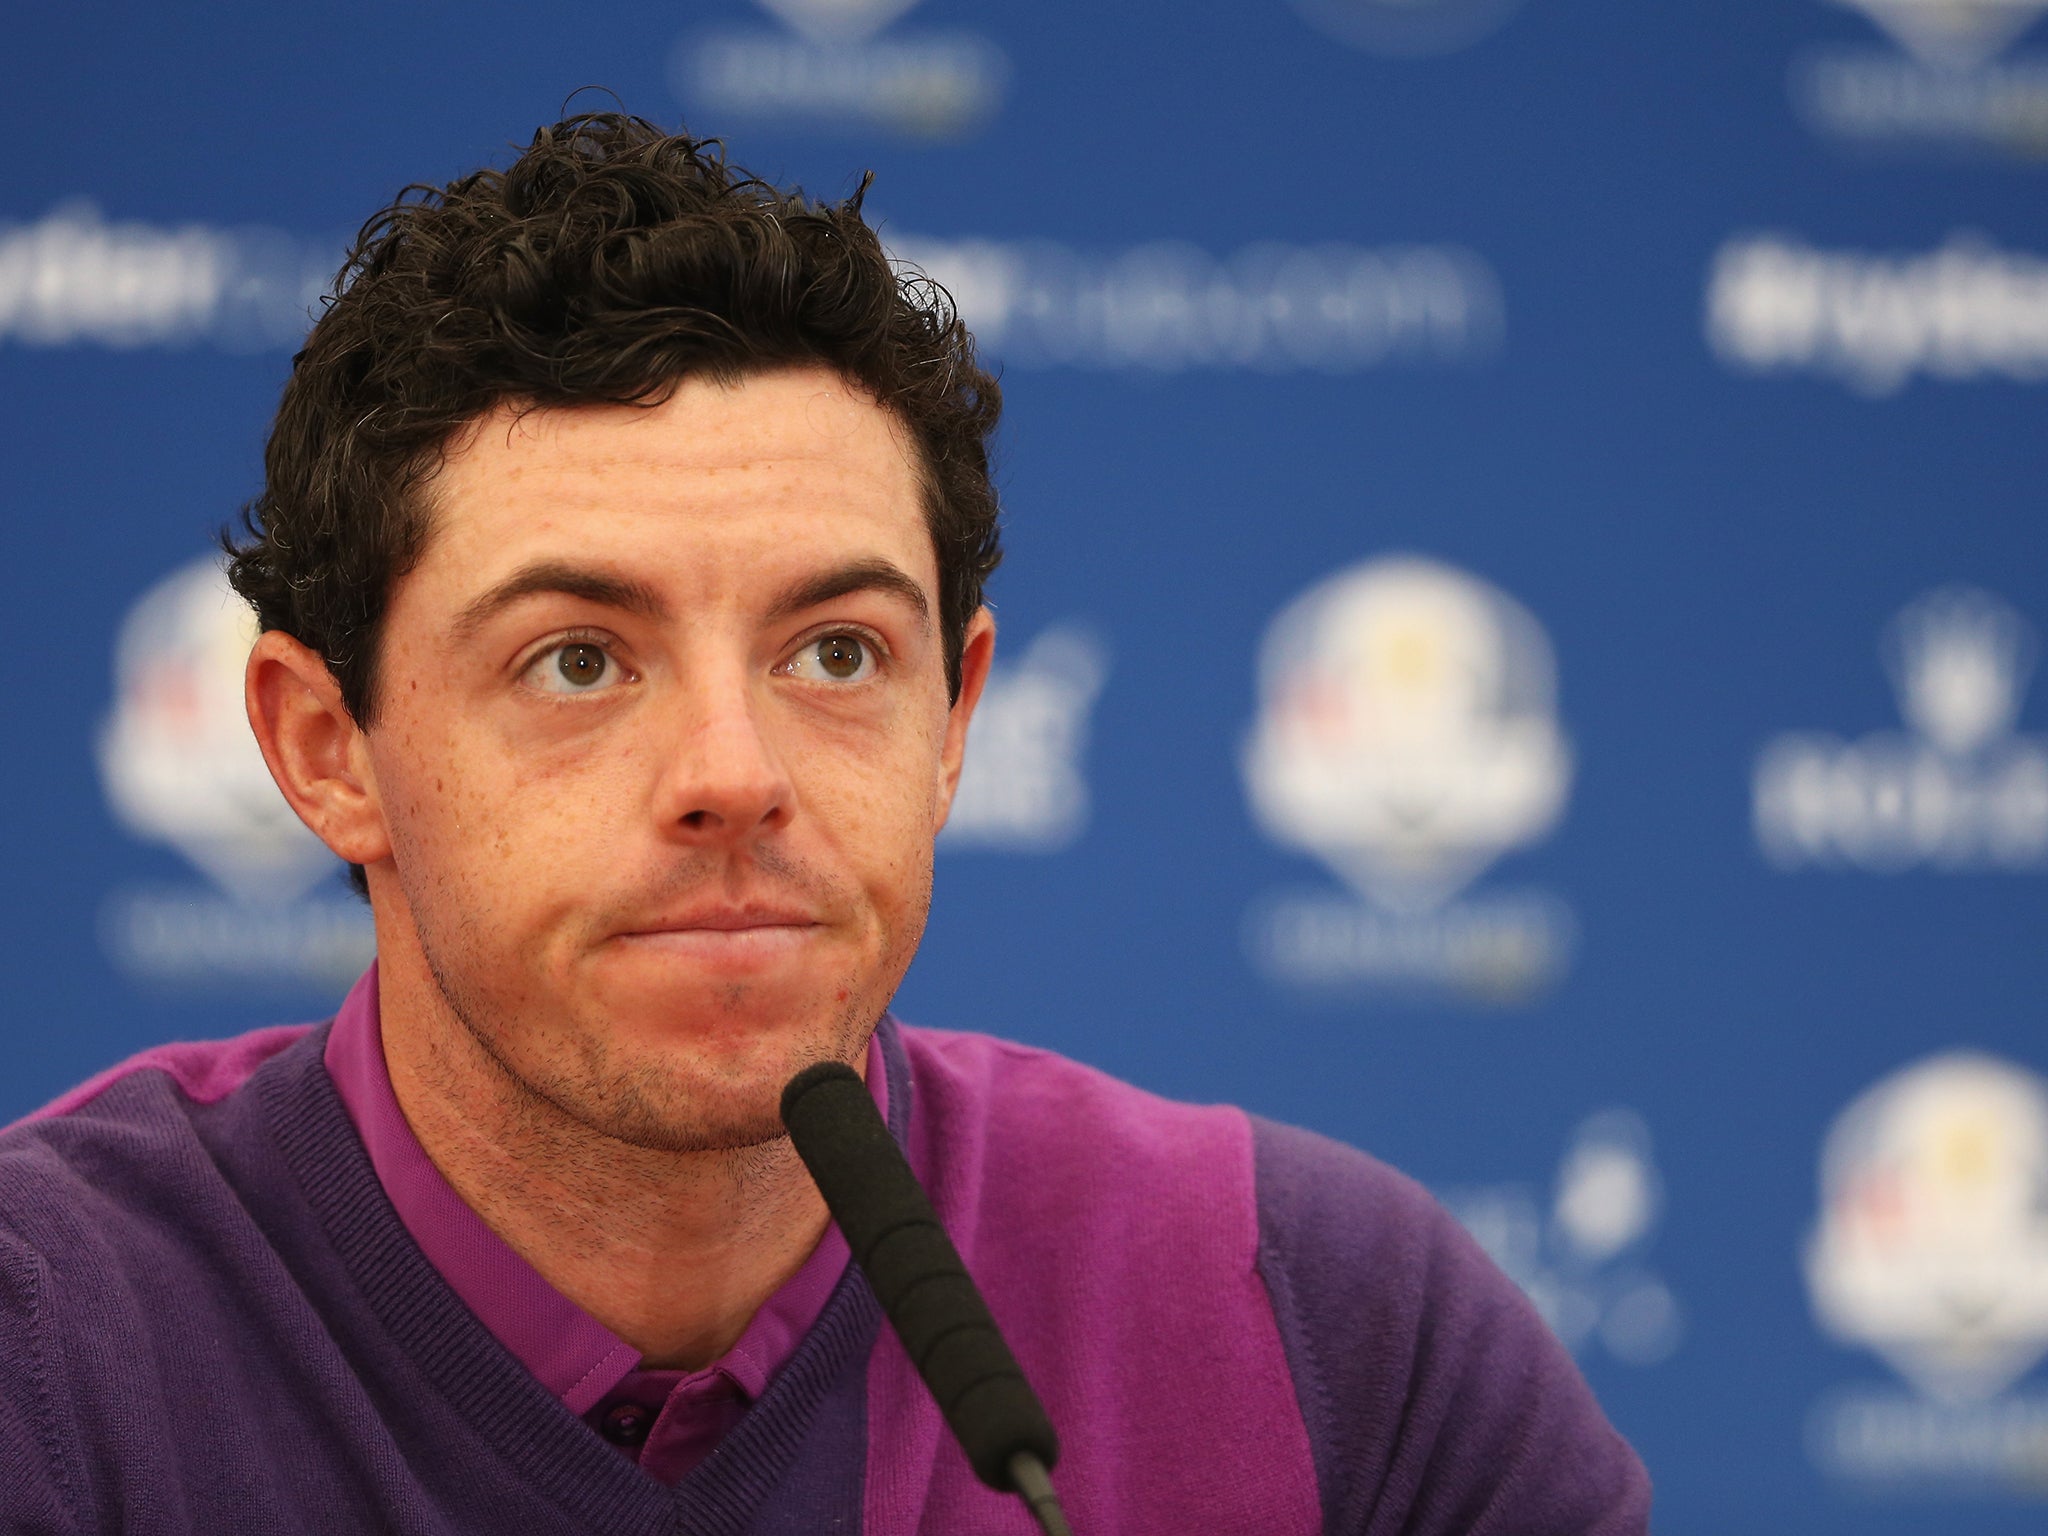 Rory McIlroy of Europe looks on at a press conference